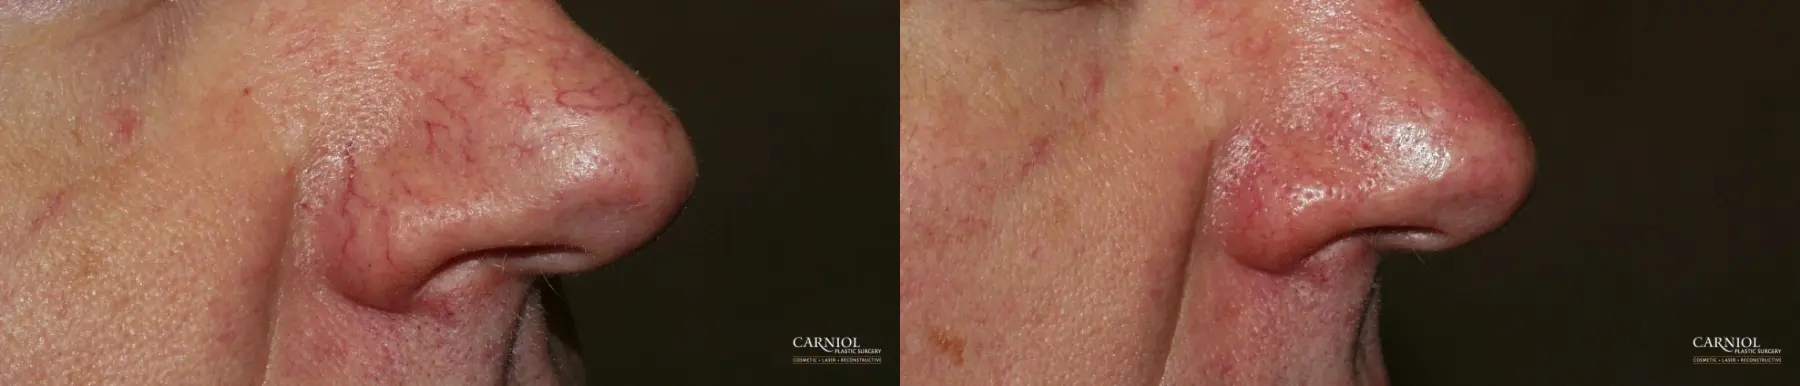 Spider Veins: Patient 1 - Before and After 1